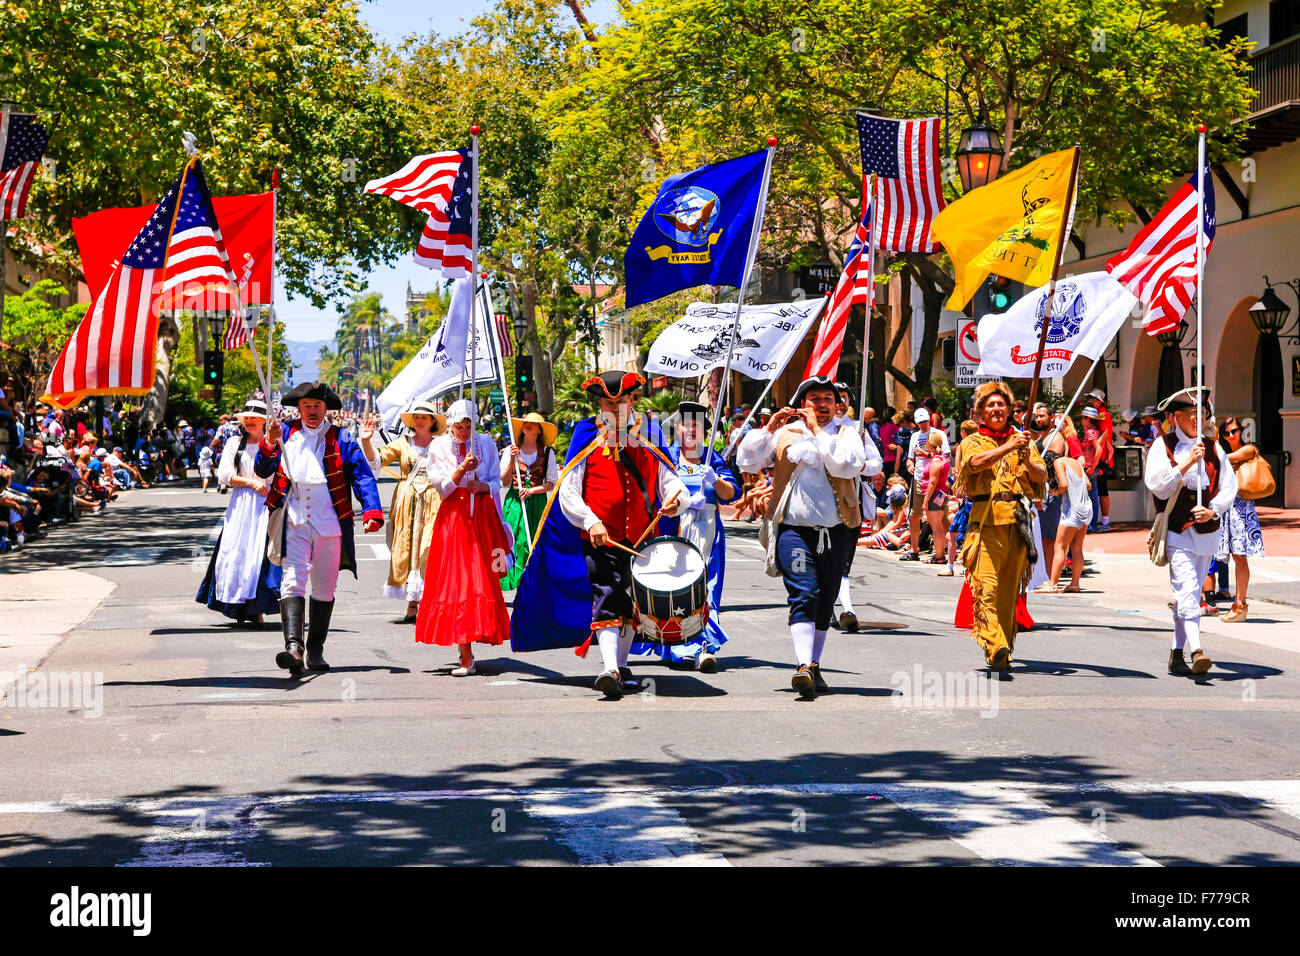 California Pioneers actors lead the July 4th celebration parade in